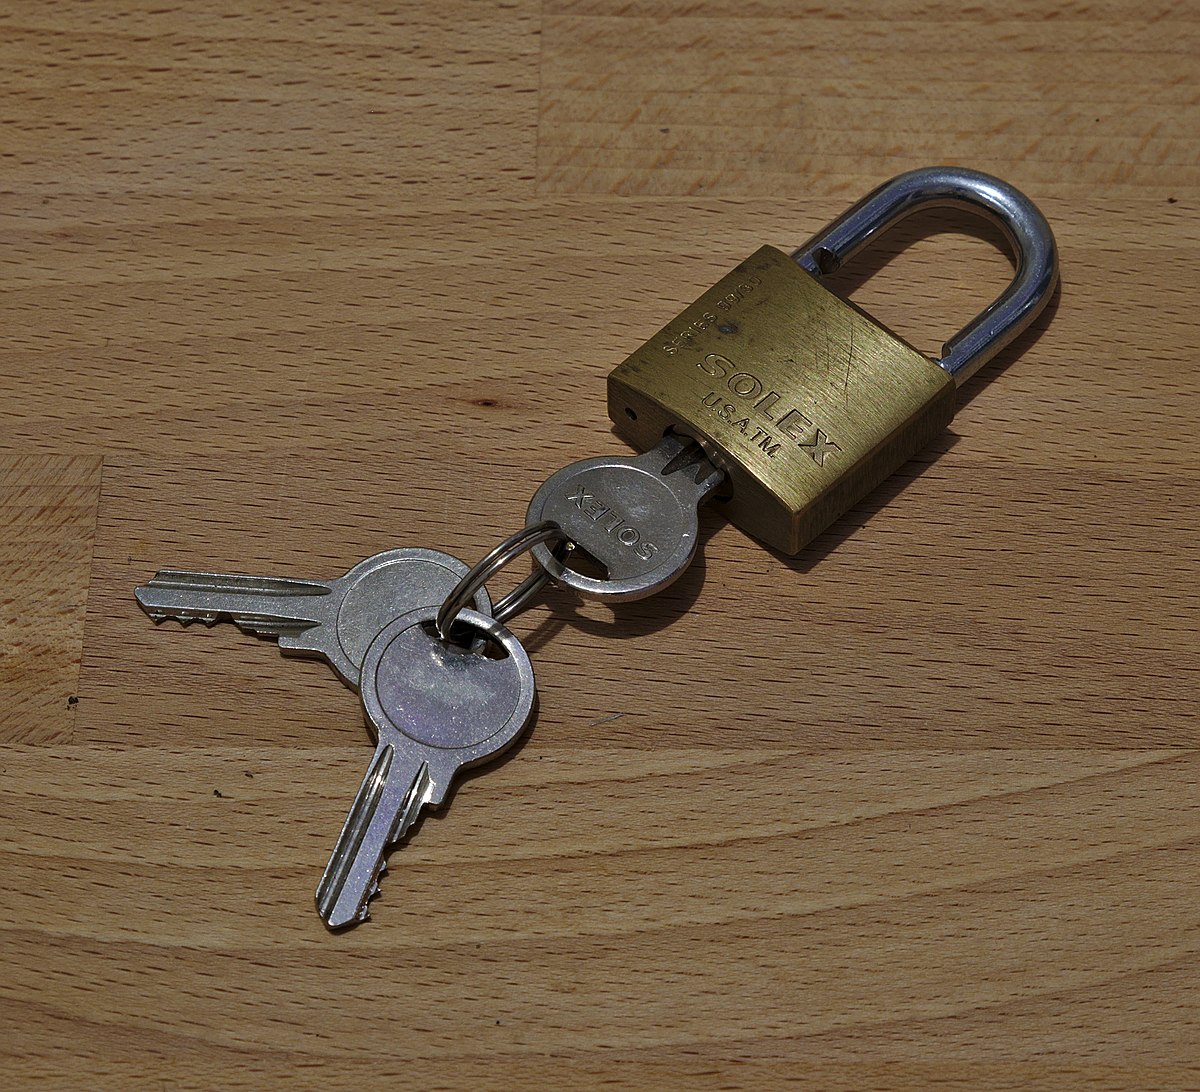 A locked padlock with a key next to it.